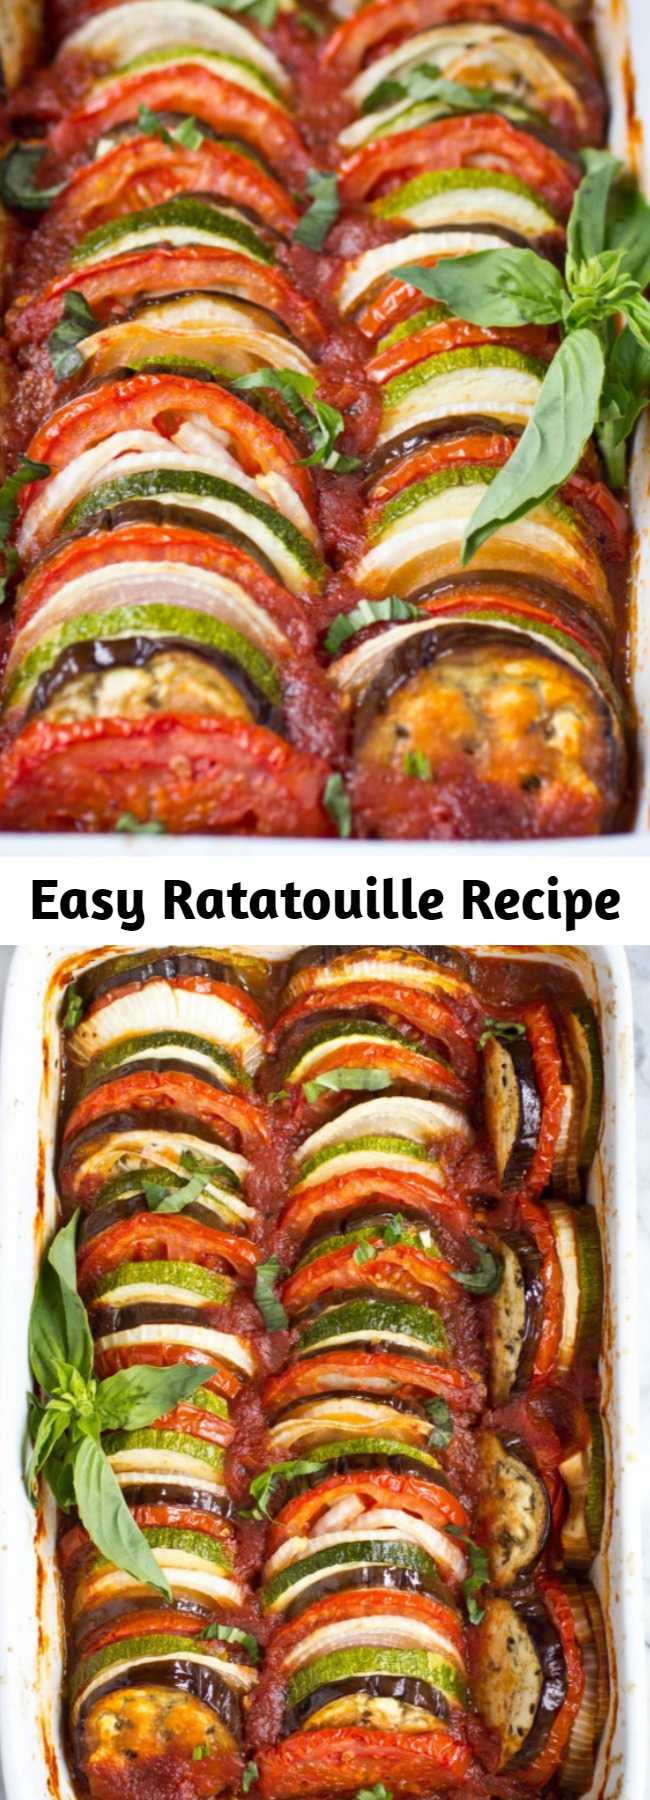 Easy Ratatouille Recipe - This Ratatouille recipe comes together quickly for a fresh weeknight dinner. Plus, it's suitable for gluten free, paleo and vegan diets! It’s a light & fresh dish. Plus, it freezes well – so go ahead and make a double batch! #ratatouille #glutenfreesavory #paleomeals #whole30dinner #whole30sidedish #ketodinnerrecipe #vegetarianeasyrecipes